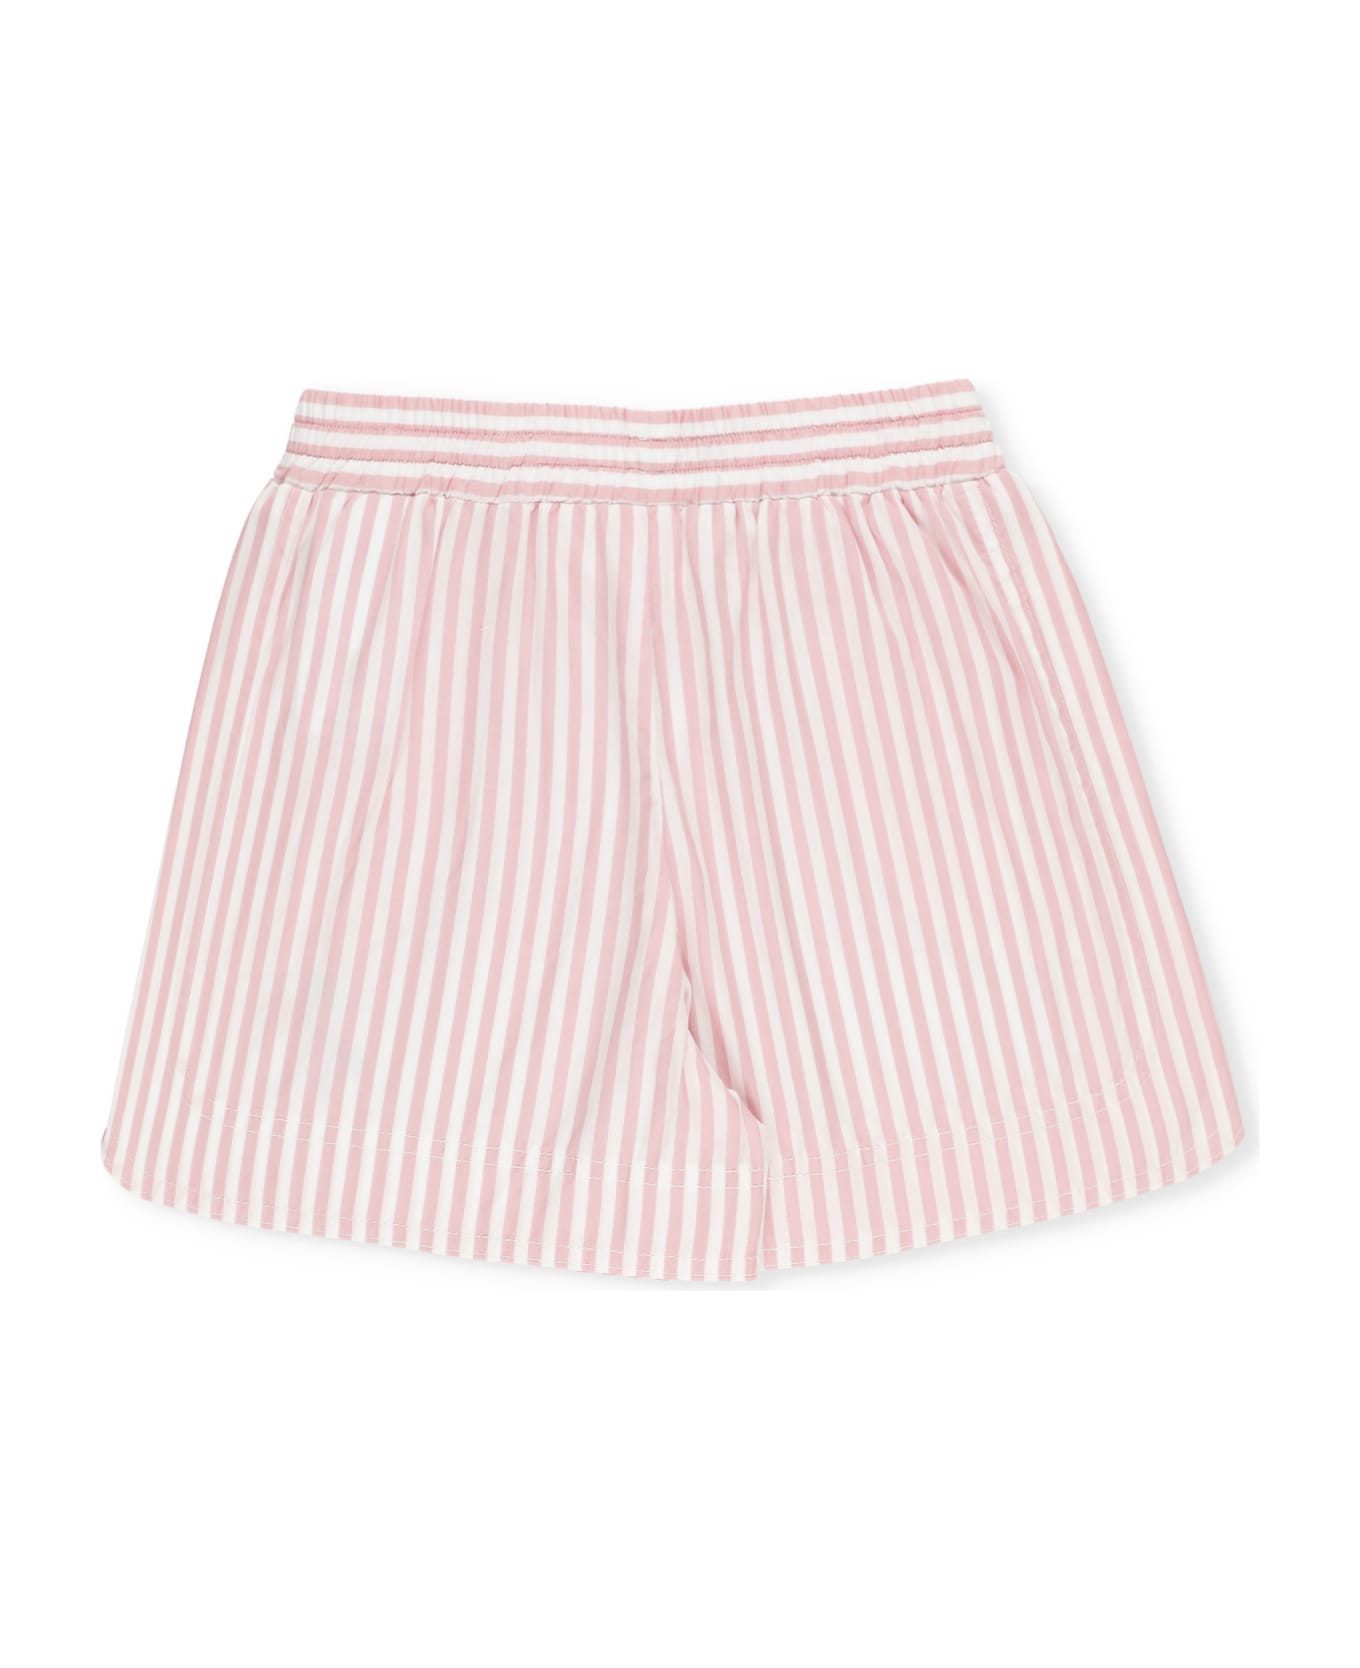 Palm Angels Striped Shorts - Pink ボトムス